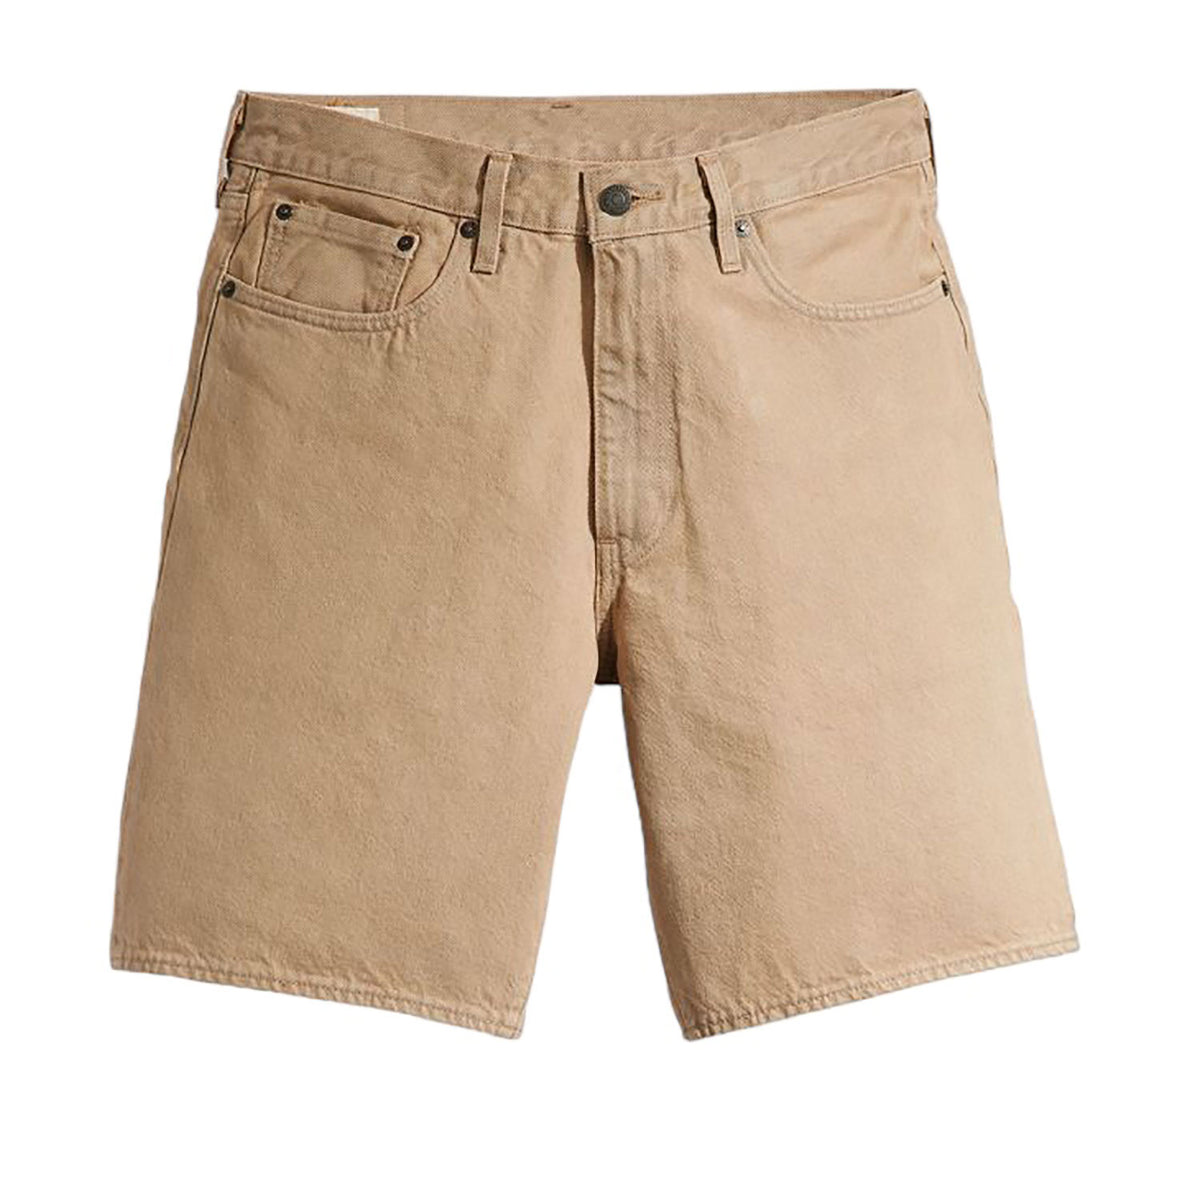 Levi's 468 Stay Loose men's shorts